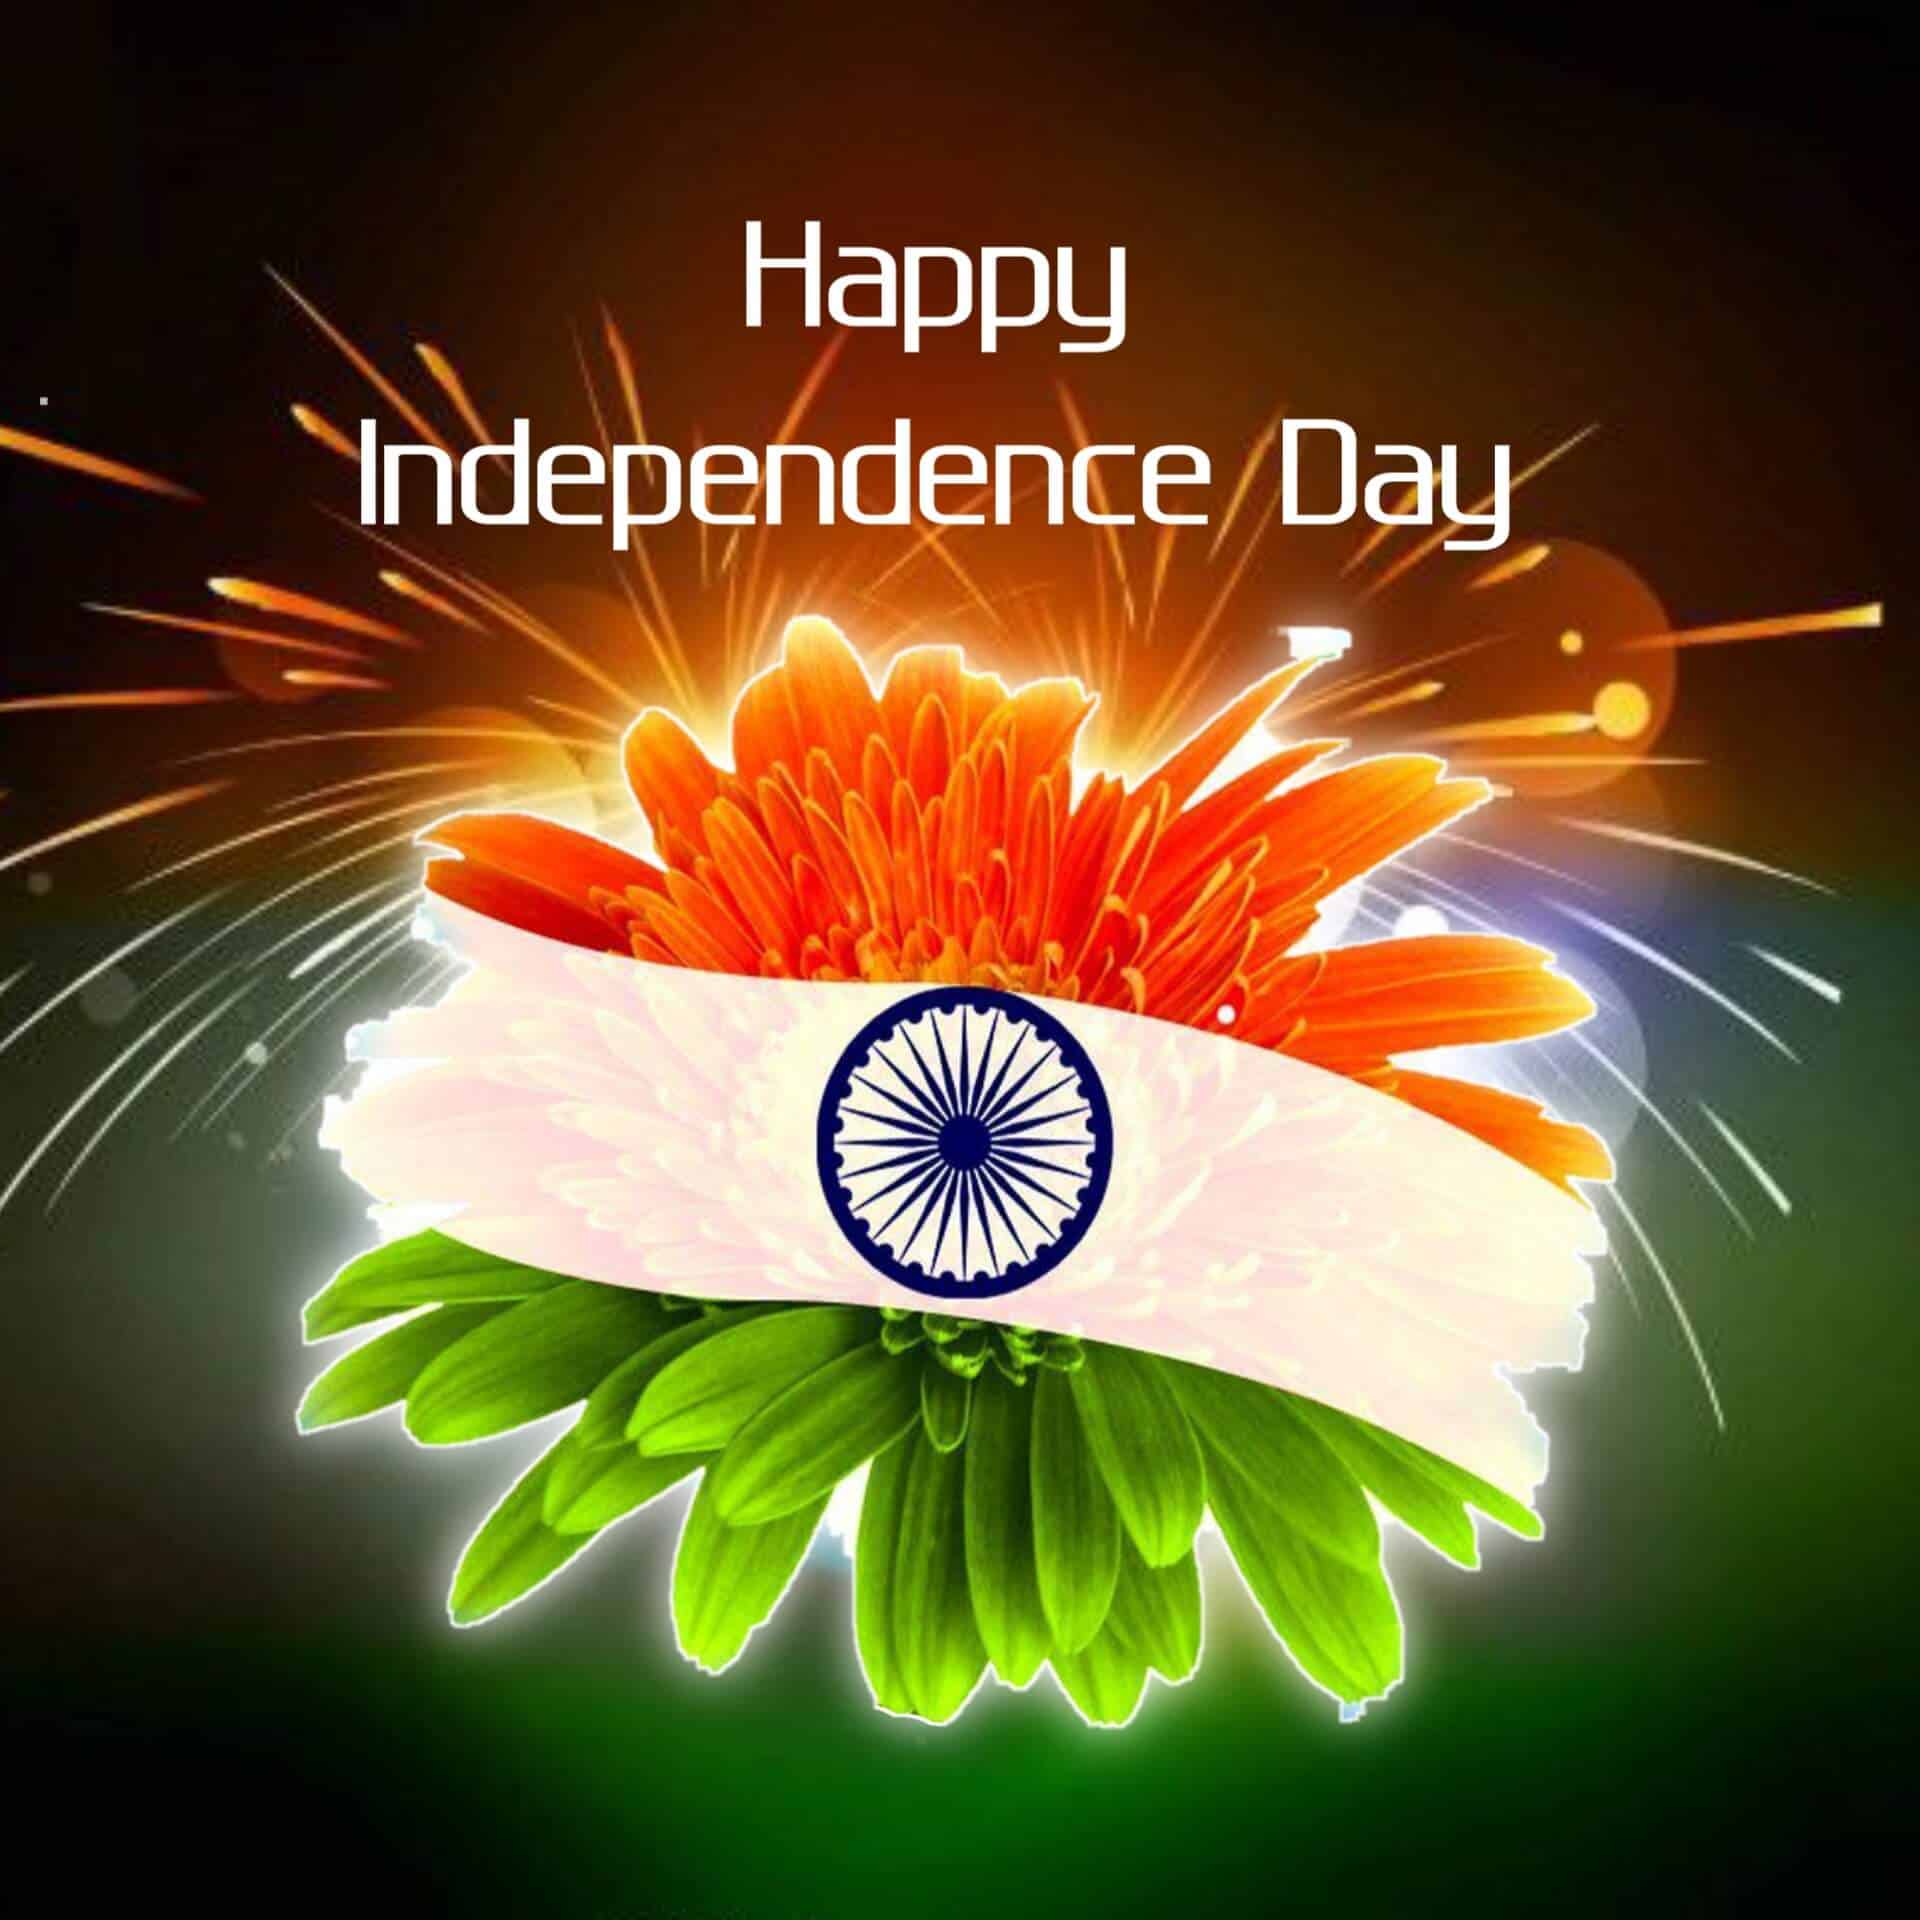 60+] Happy Independence Day Images, Pic, Photo & Wallpaper